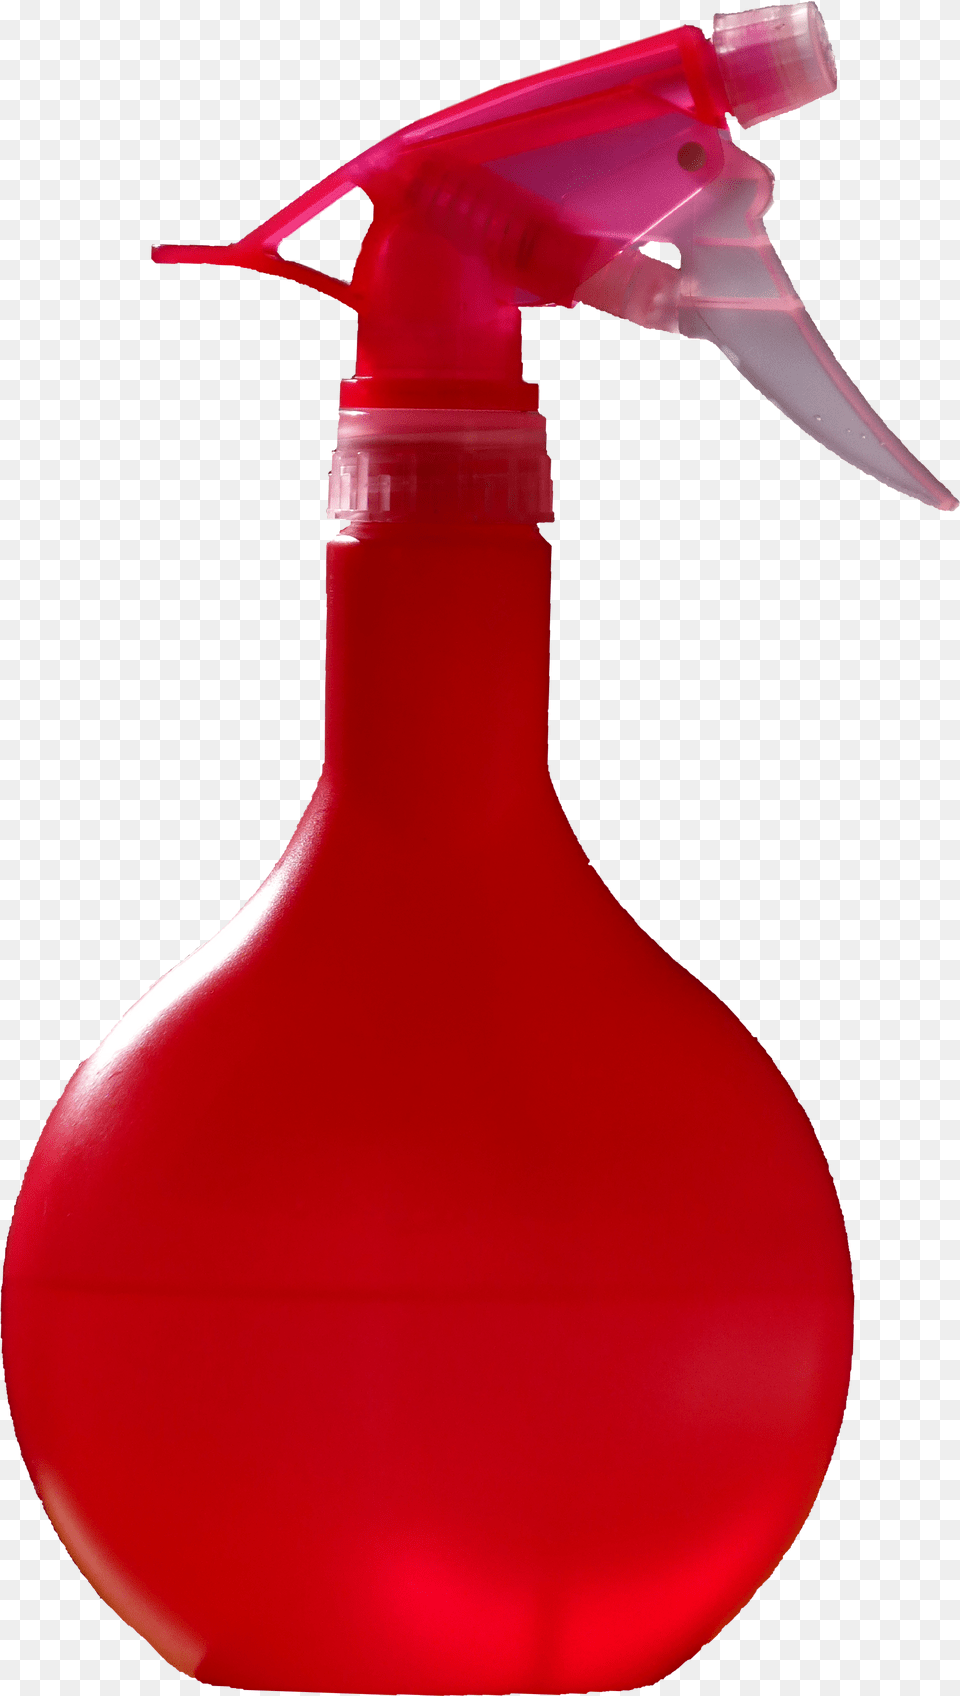 Red Spray Bottle Bottle Sprayer, Can, Spray Can, Tin Free Png Download